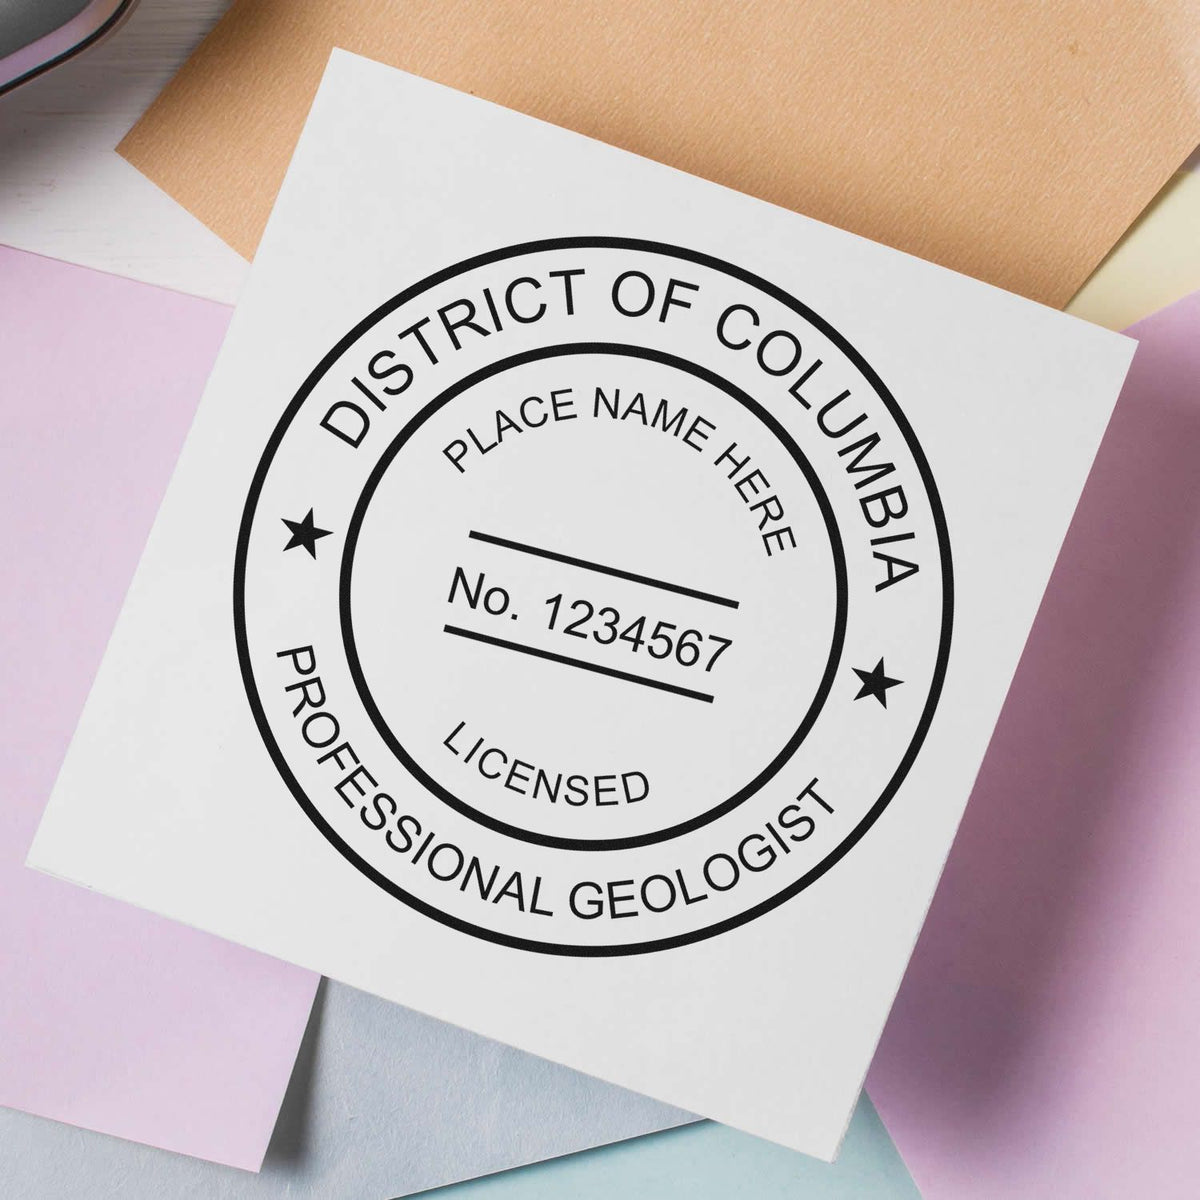 A photograph of the District of Columbia Professional Geologist Seal Stamp stamp impression reveals a vivid, professional image of the on paper.